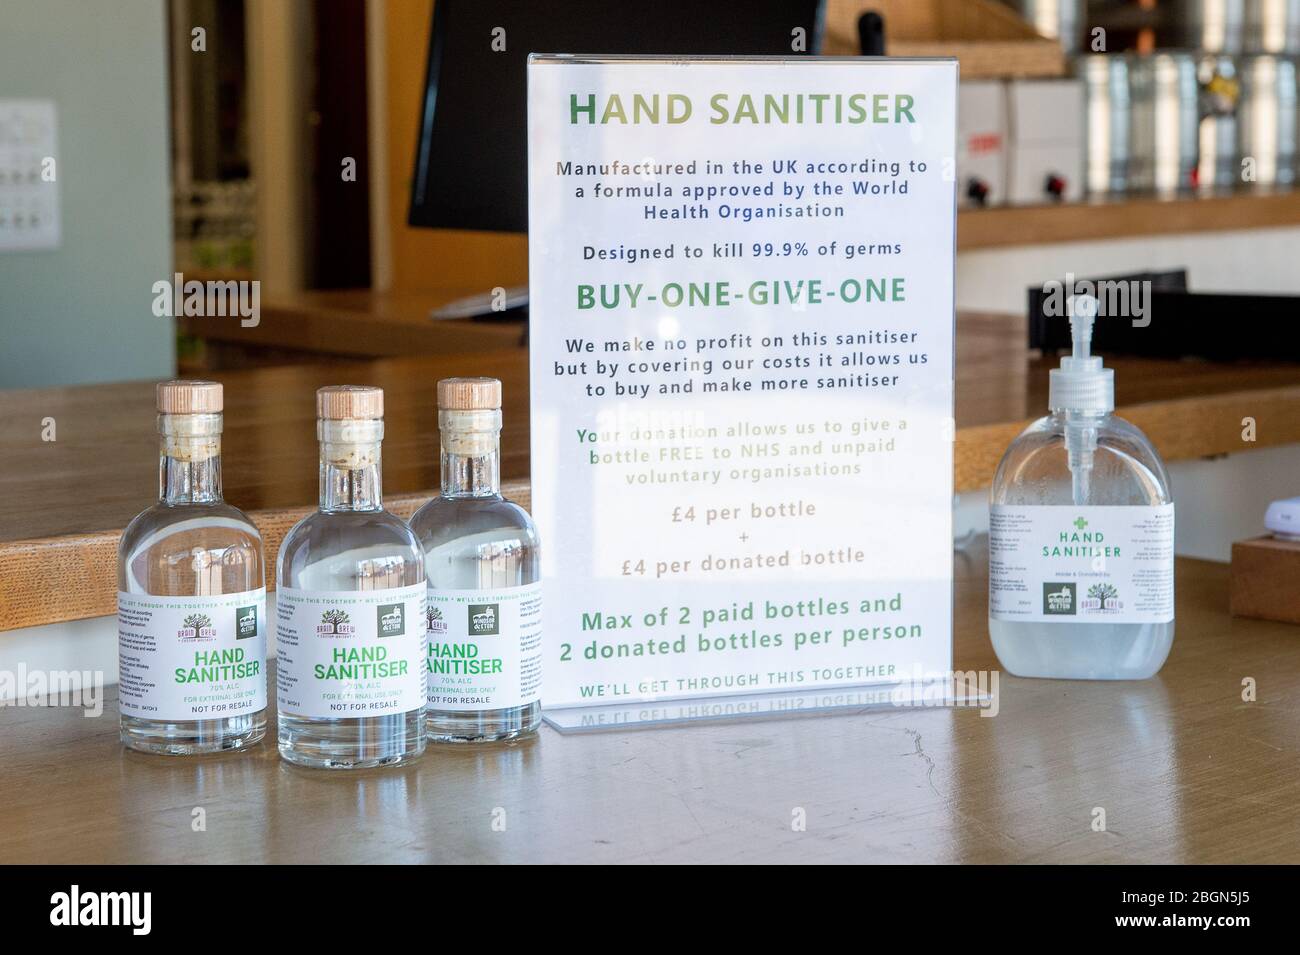 Windsor, Berkshire, UK. 22nd April, 2020. Windsor & Eton Brewery have teamed up with craft spirits producer Brain Brew Custom Whiskey to source, bottle and distribute hand sanitiser. It is manufactured to the World Health Organisation recipe and is supplied in small bottles that are normally used for whiskey. They make no profit on this product and are supplying it free of charge to the NHS, care workers and unpaid voluntary organisations providing front line support during the Coronavirus Pandemic. Credit: Maureen McLean/Alamy Live News Stock Photo